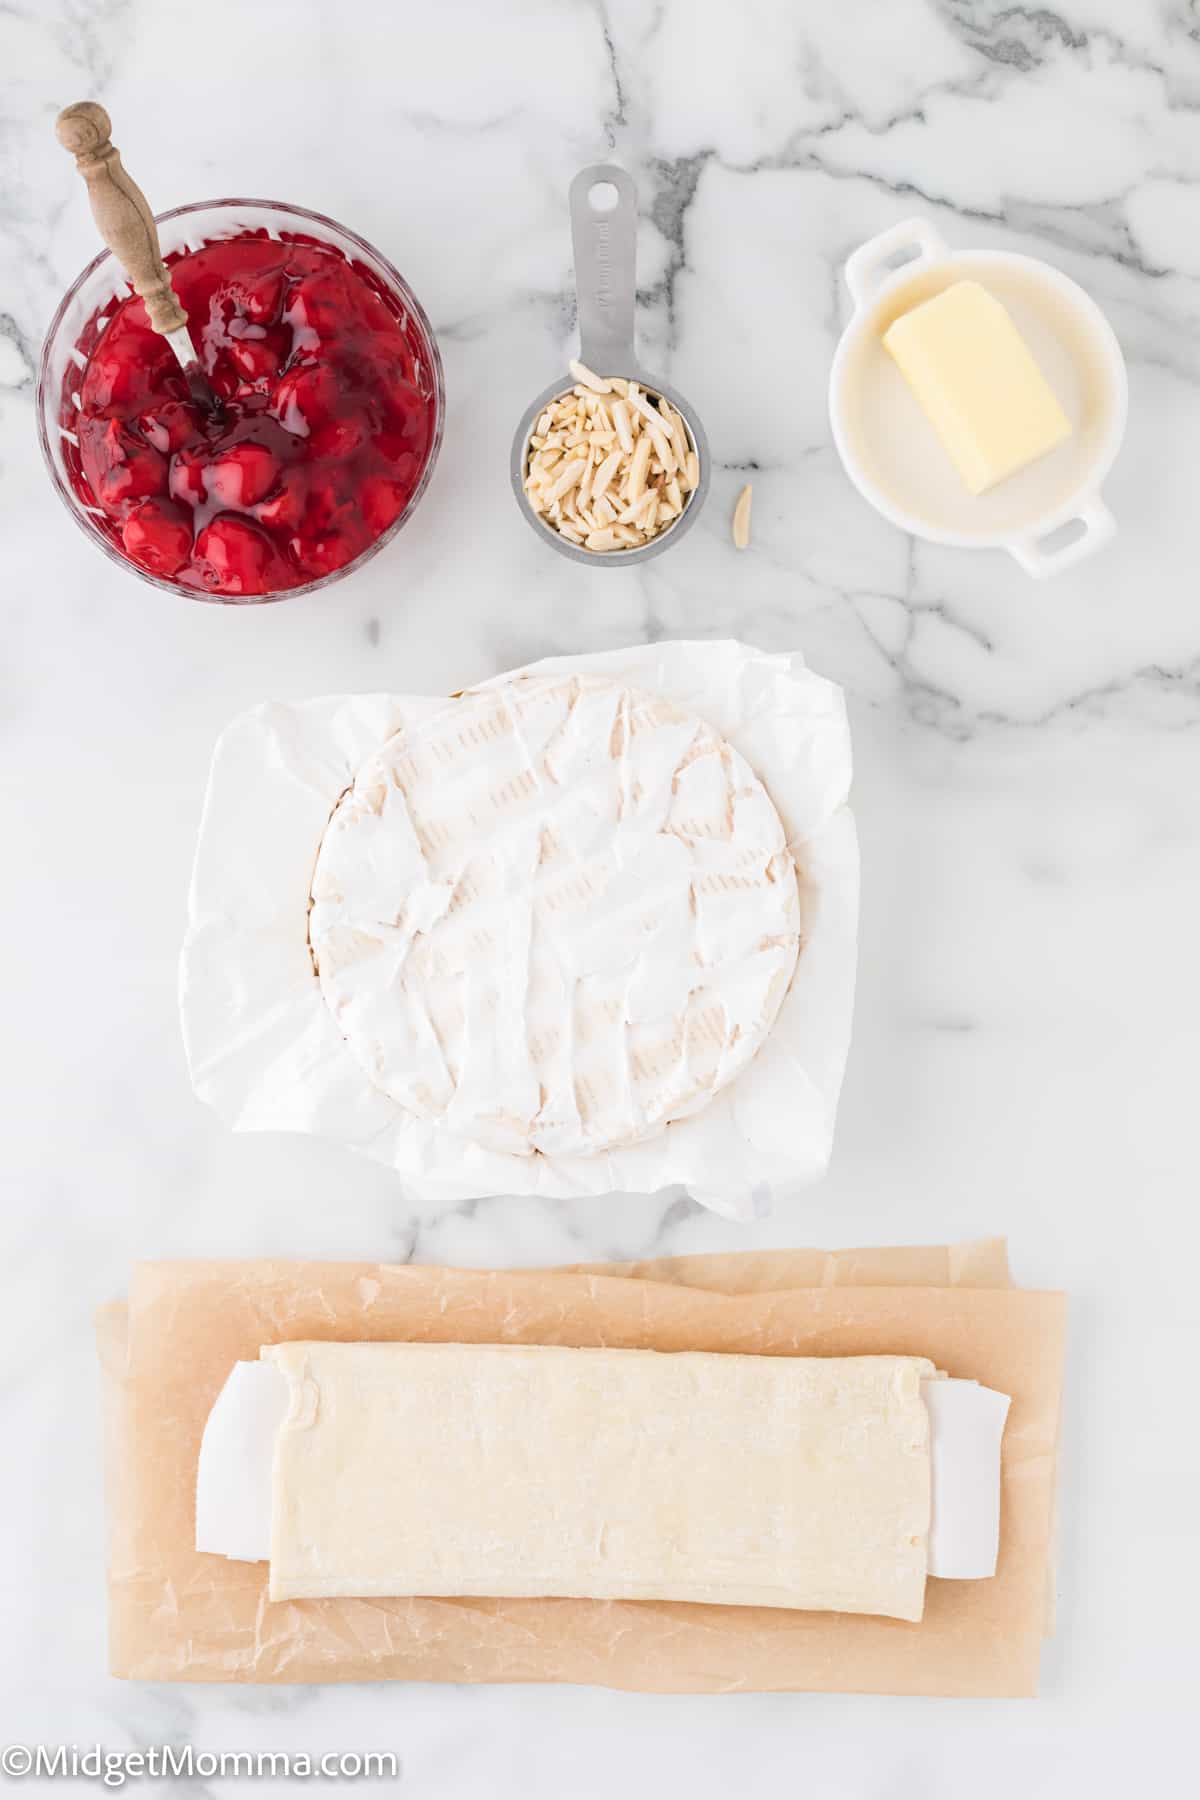 Cherry Baked Brie in Puff Pastry Recipe Ingredients